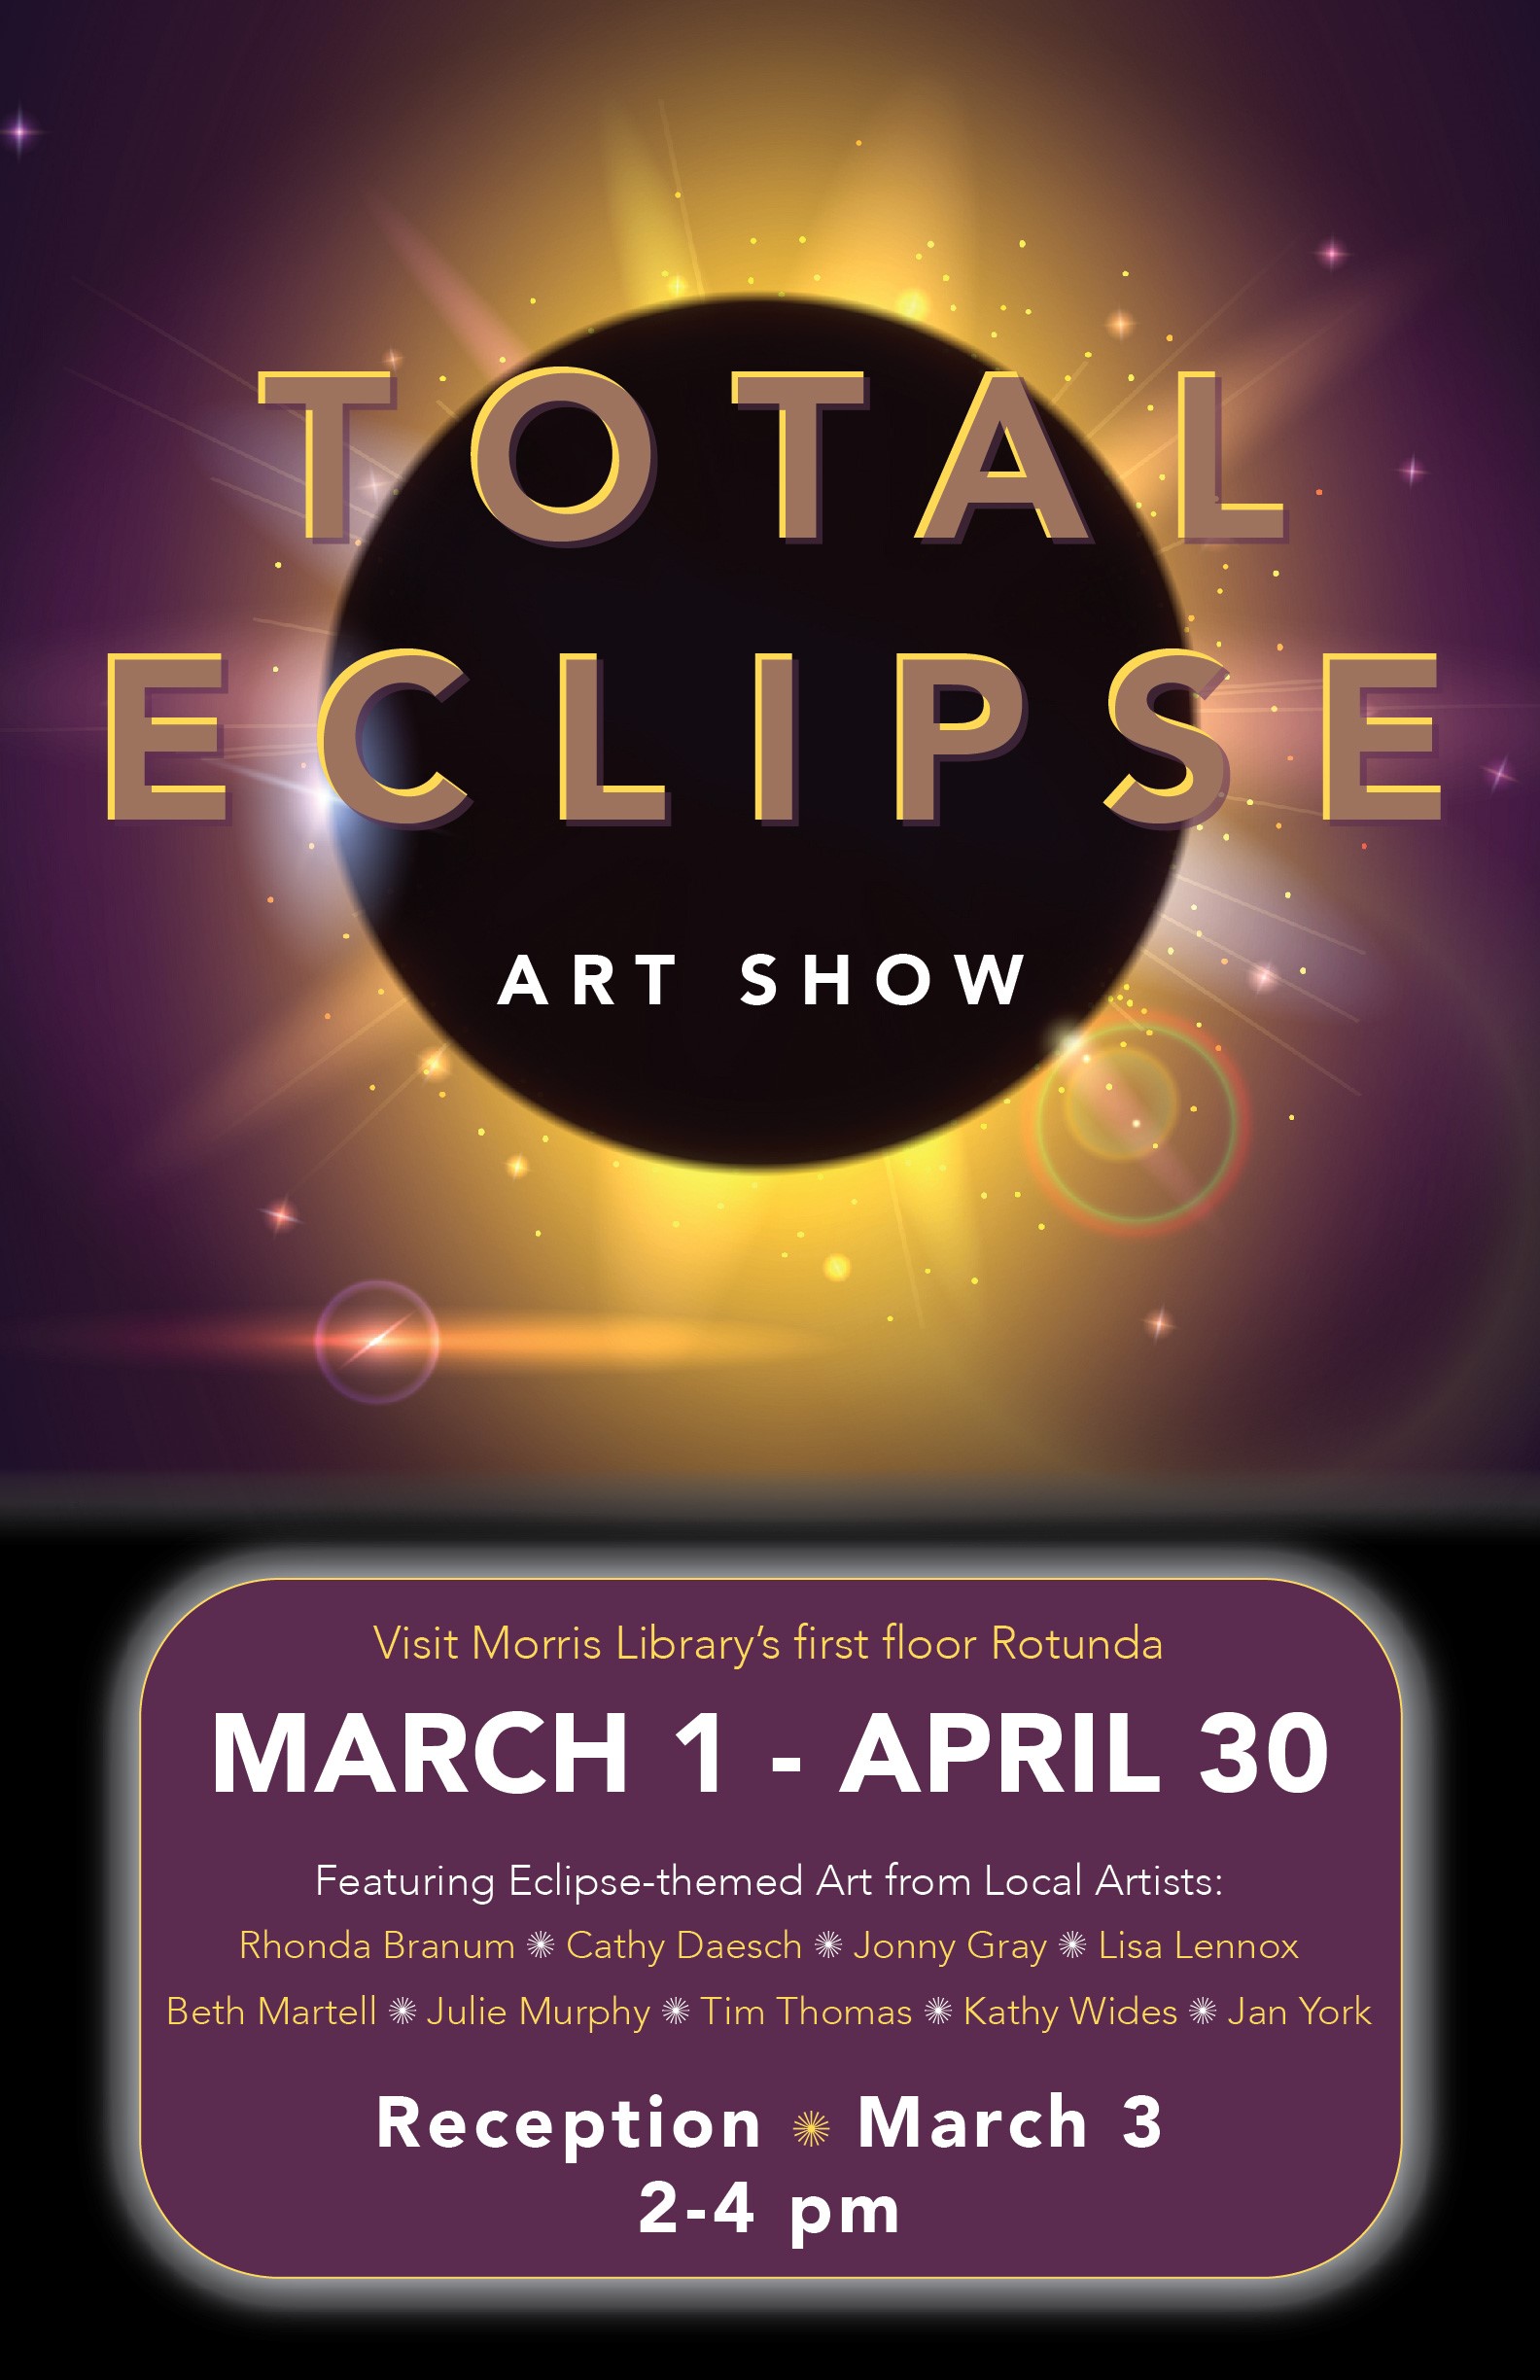 Join us for Total Eclipse, a exhibition of See eclipse-themed art in Morris Library's first floor rotunda. The show runs from March 1 through April 30, 2024, and features local artists Rhonda Branum, Cathy Daesch, Jonny Gray, Lisa Lennox, Beth Martell, Julie Murphy, Tim Thomas, Kathy Wides, and Jan York. There will be an opening reception on March 3, from 2-4pm.